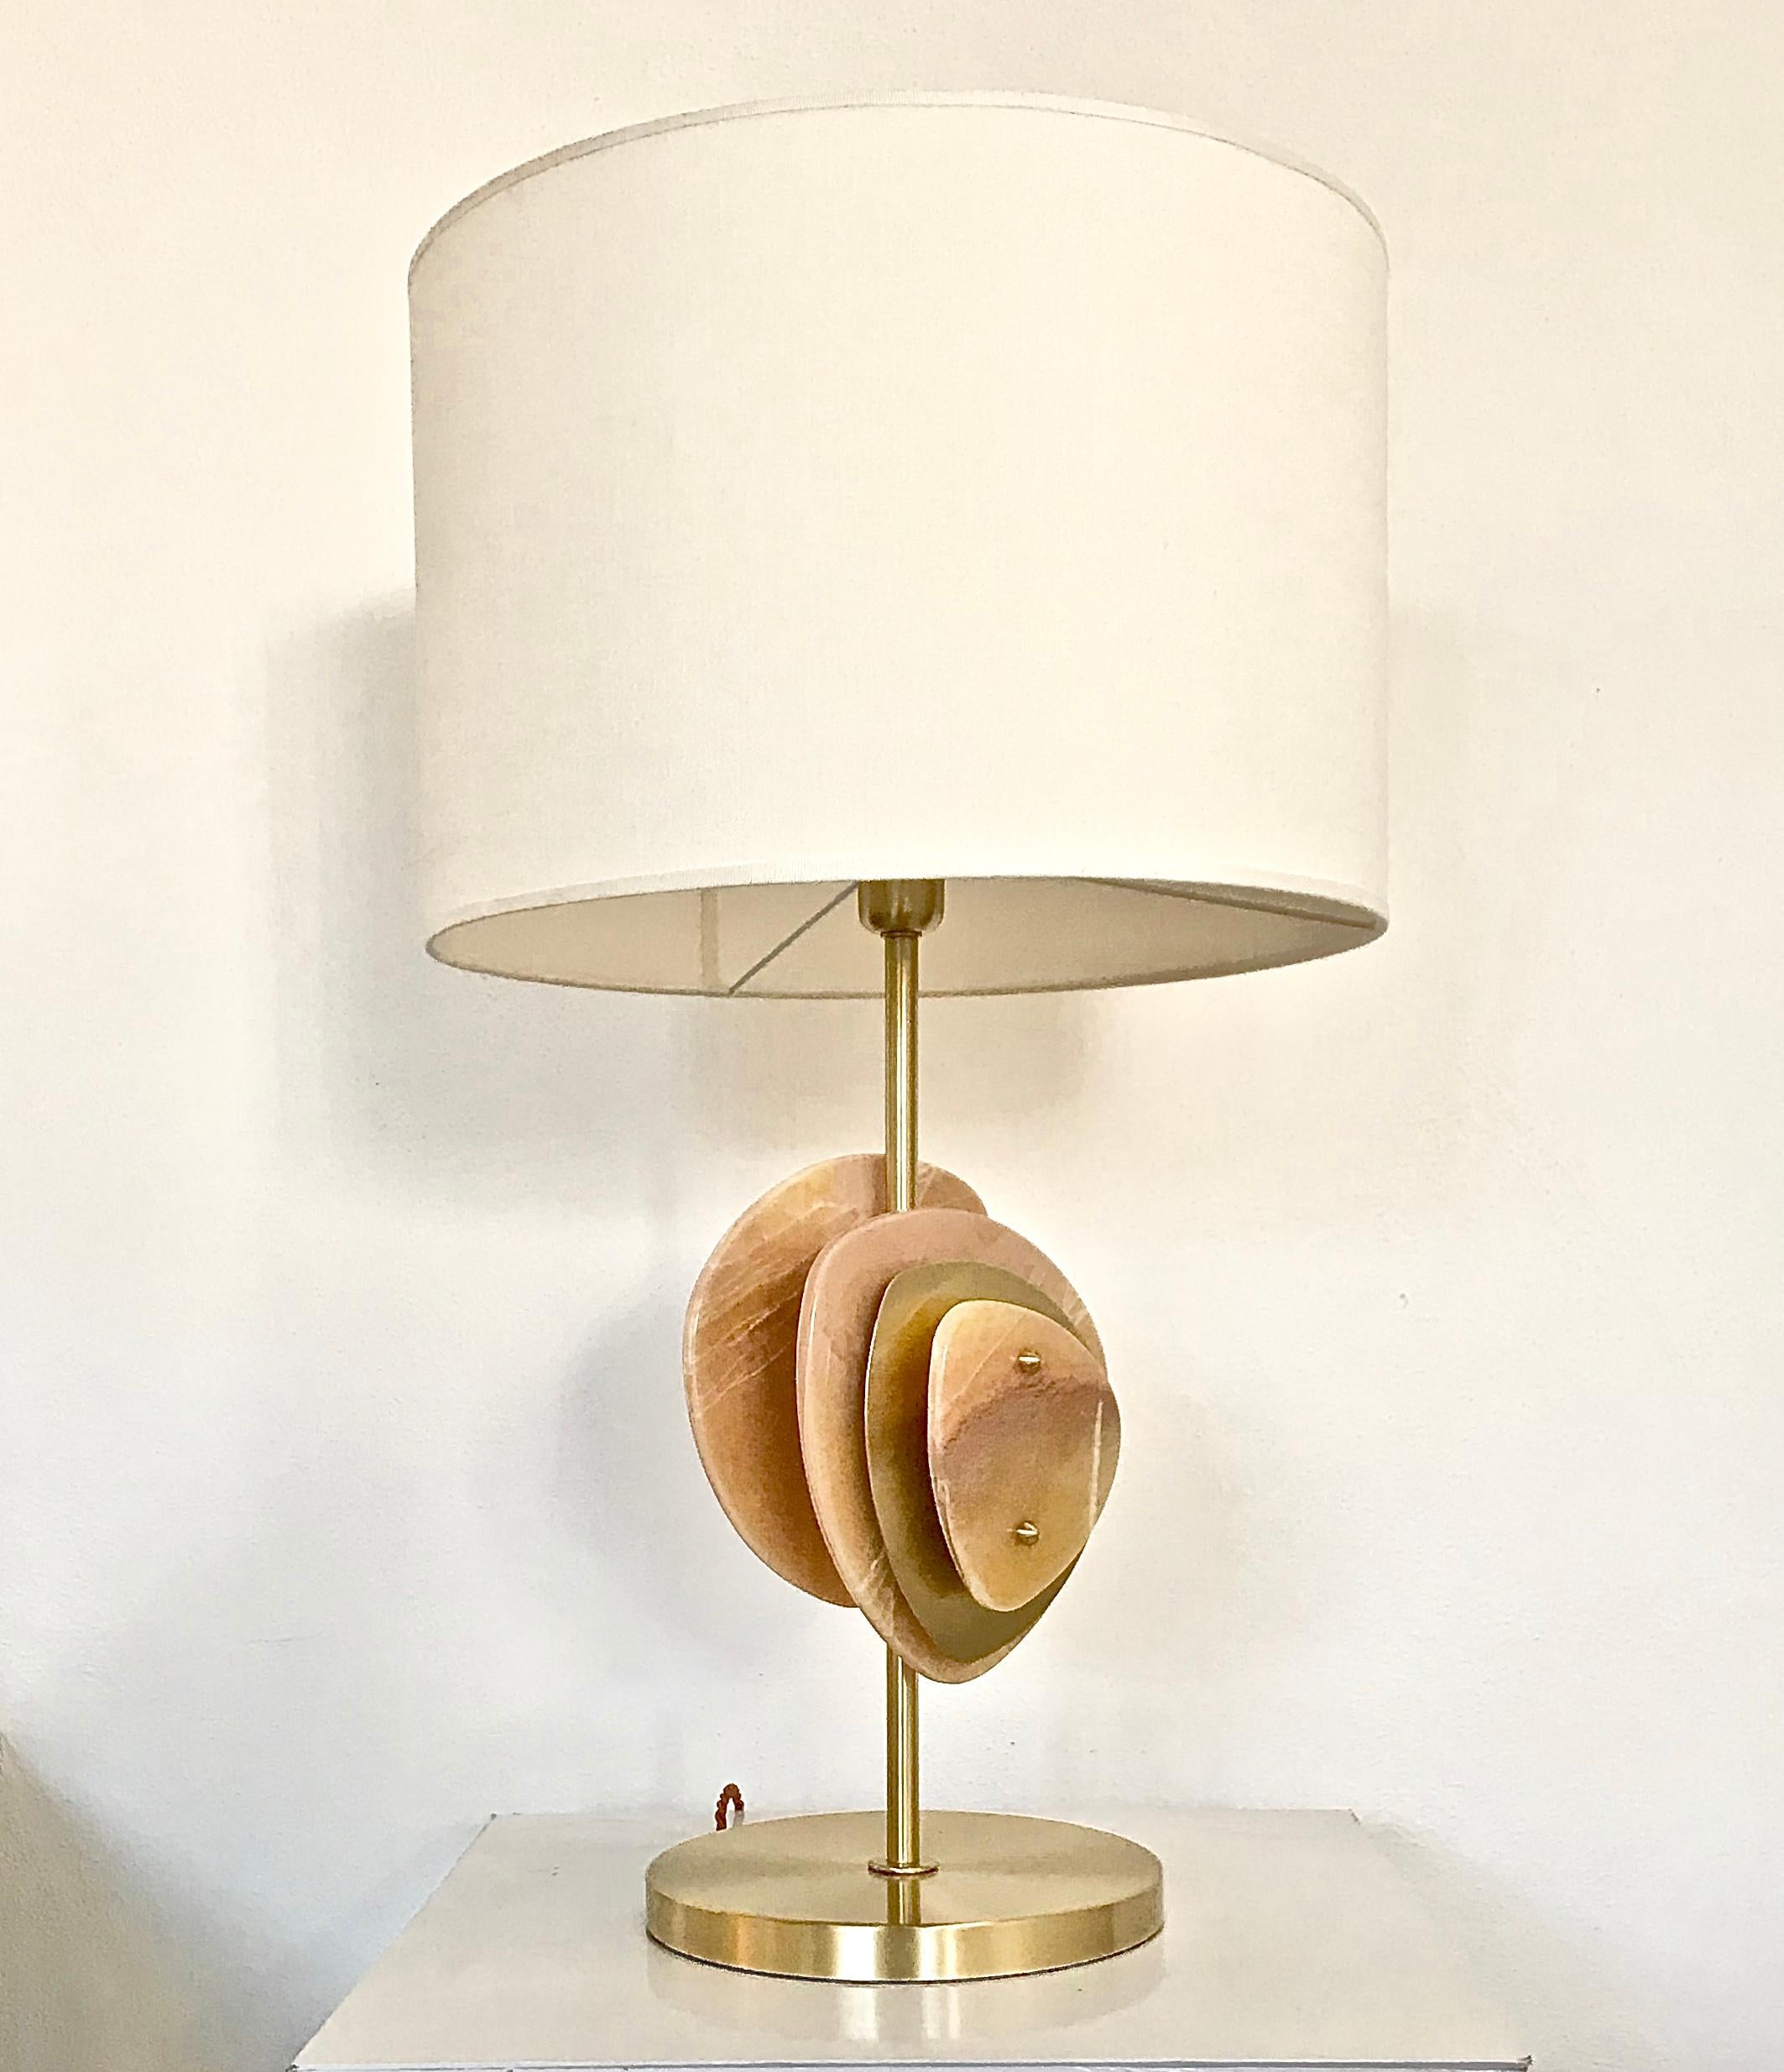 Table lamp base in satin brass with double 3-layer decorative elements on the stem in polished honey onyx and satin brass. 1 lightbulb holder E27 and braided twisted 3-pole electric cable. Cylindrical lampshade in ivory linen.